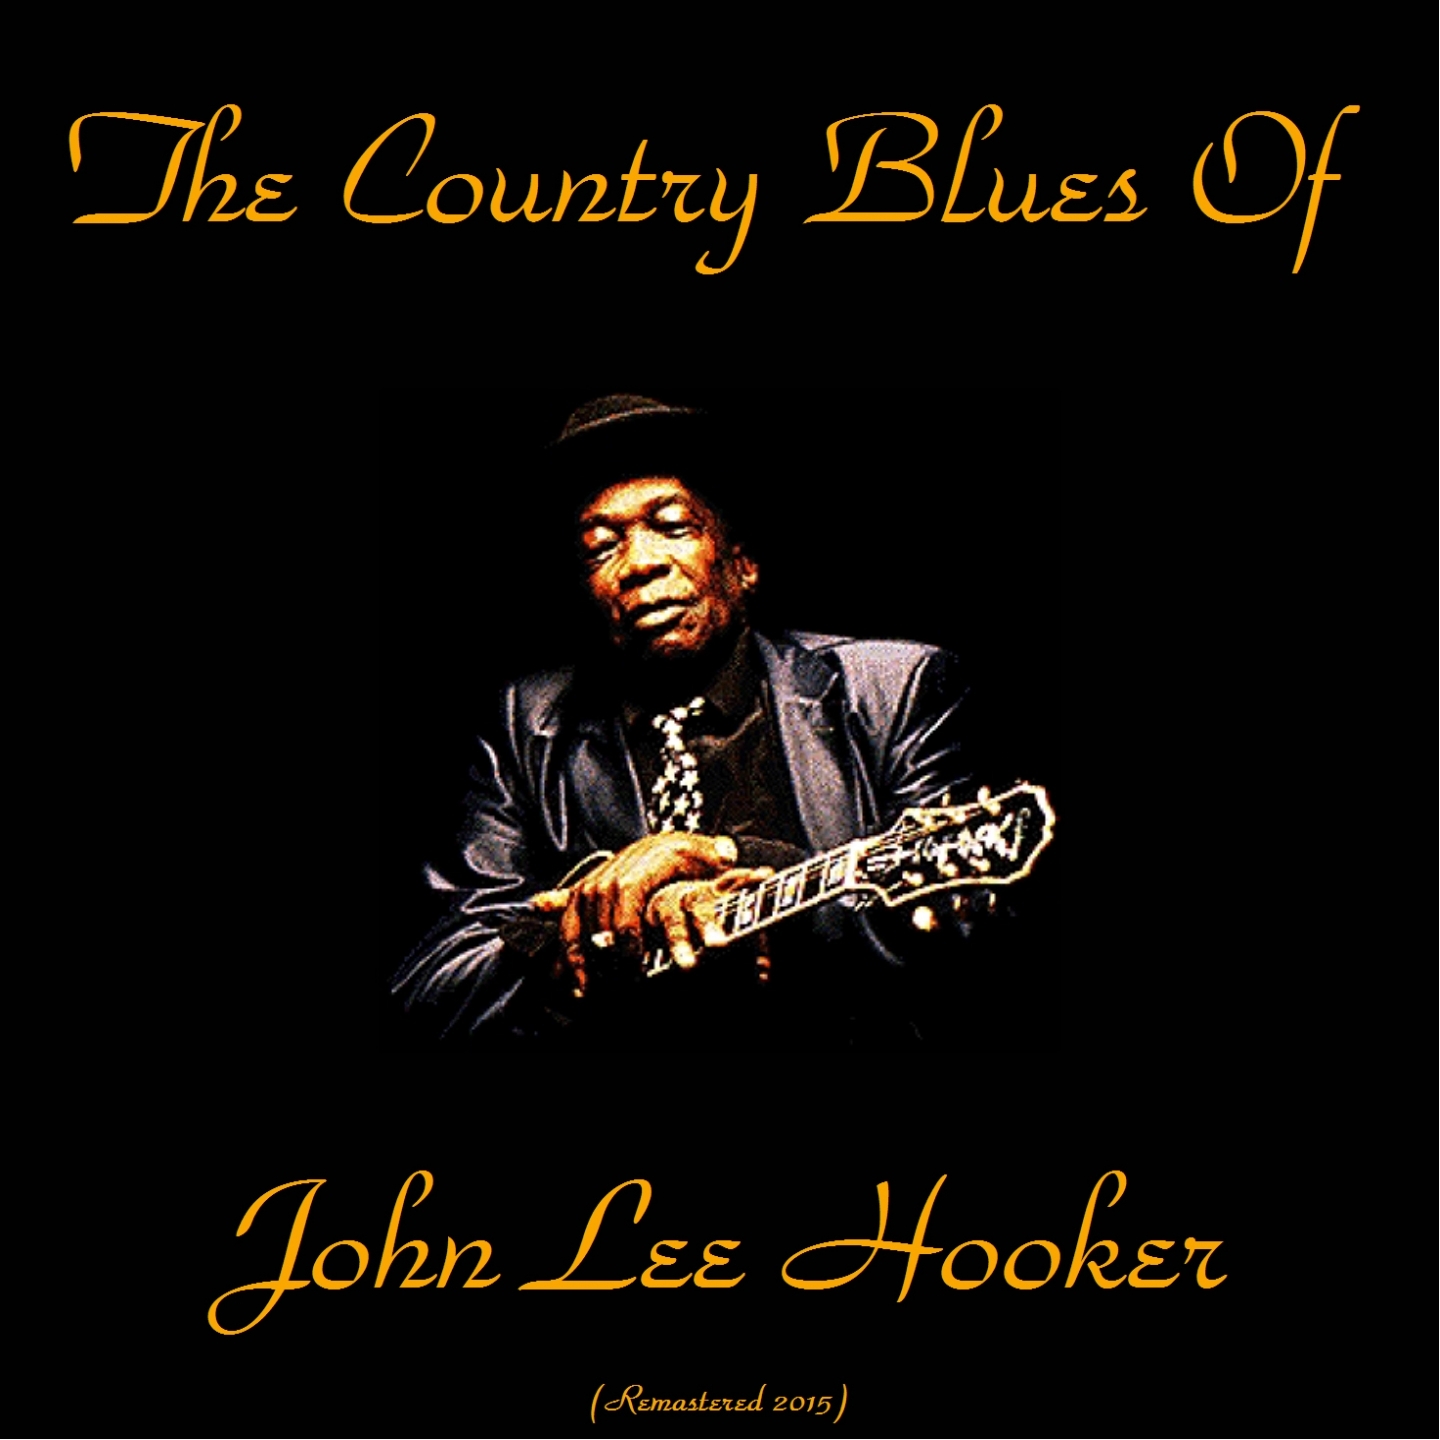 The Country Blues of John Lee Hooker (Remastered 2015)